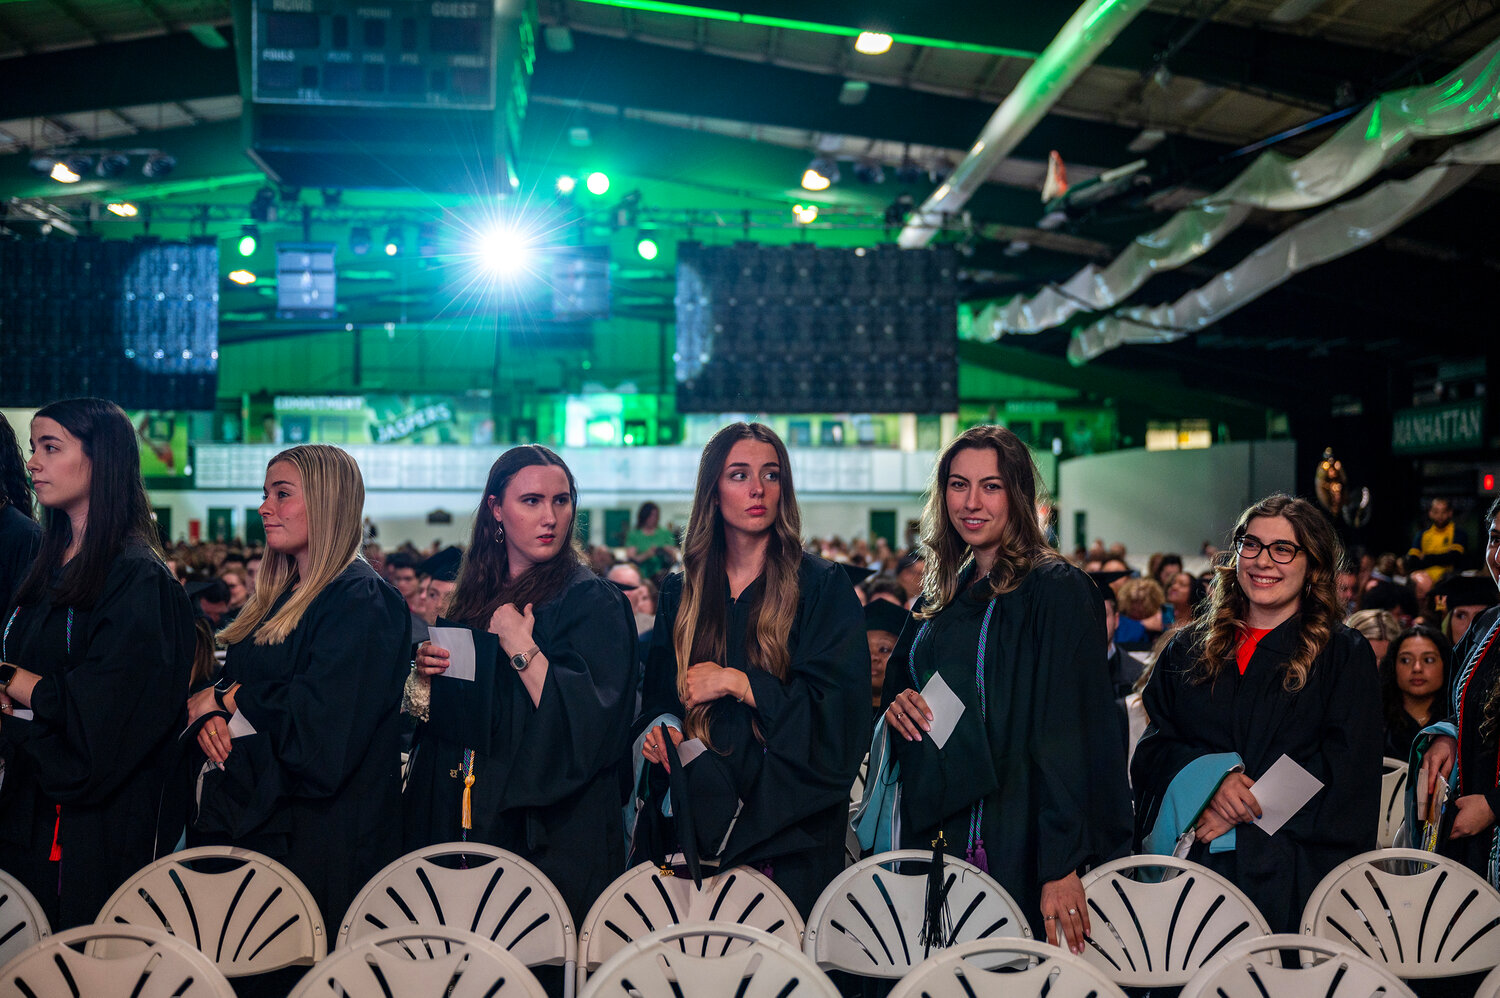 Manhattan College graduate students line up to receive their diplomas during Wednesday’s commencement ceremony. The keynote speaker was former fire department commissioner Daniel Negro, who led a workforce of over 17,000 uniformed and civilian members during former Mayor Bill de Blasio’s administration.